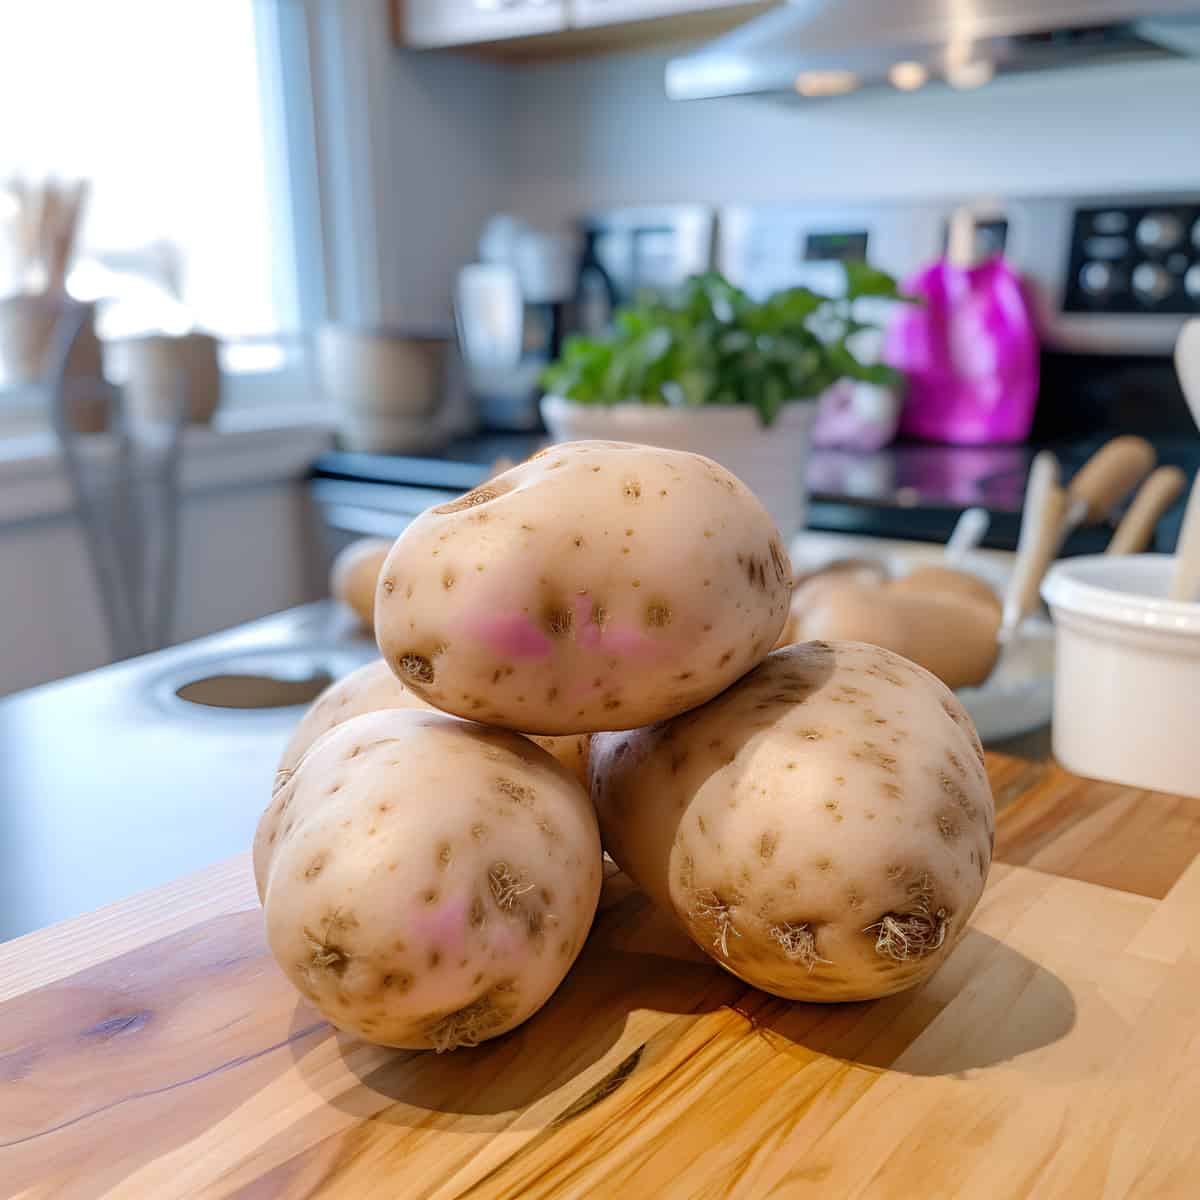 Baccara Potatoes on a kitchen counter